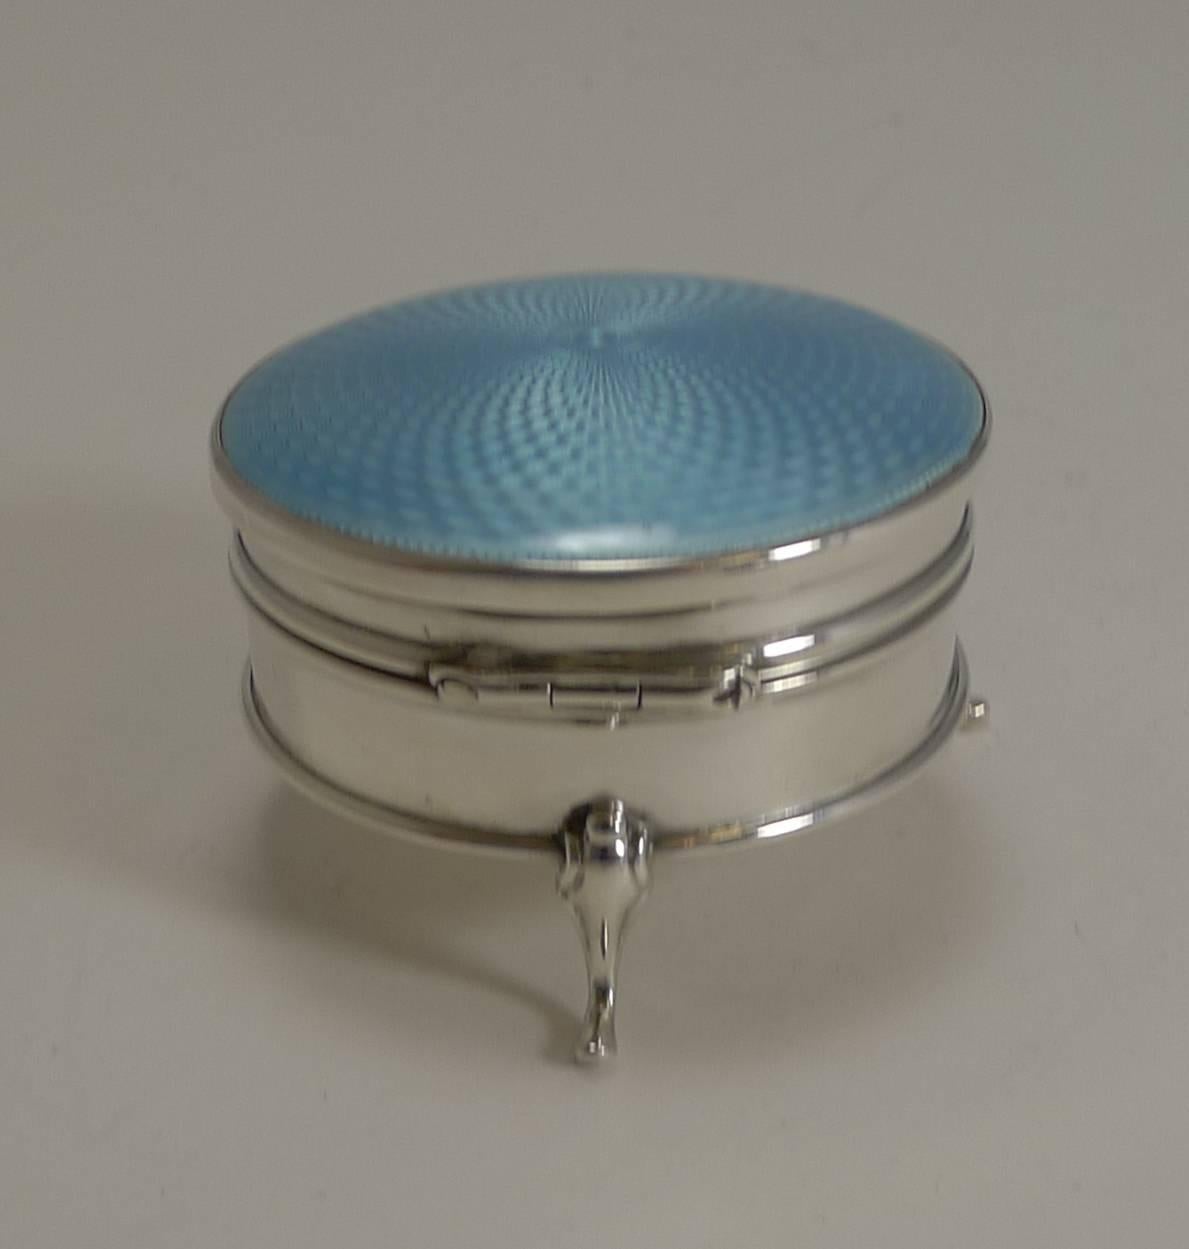 Early 20th Century Vintage English Sterling Silver and Guilloche Enamel Jewelry Box